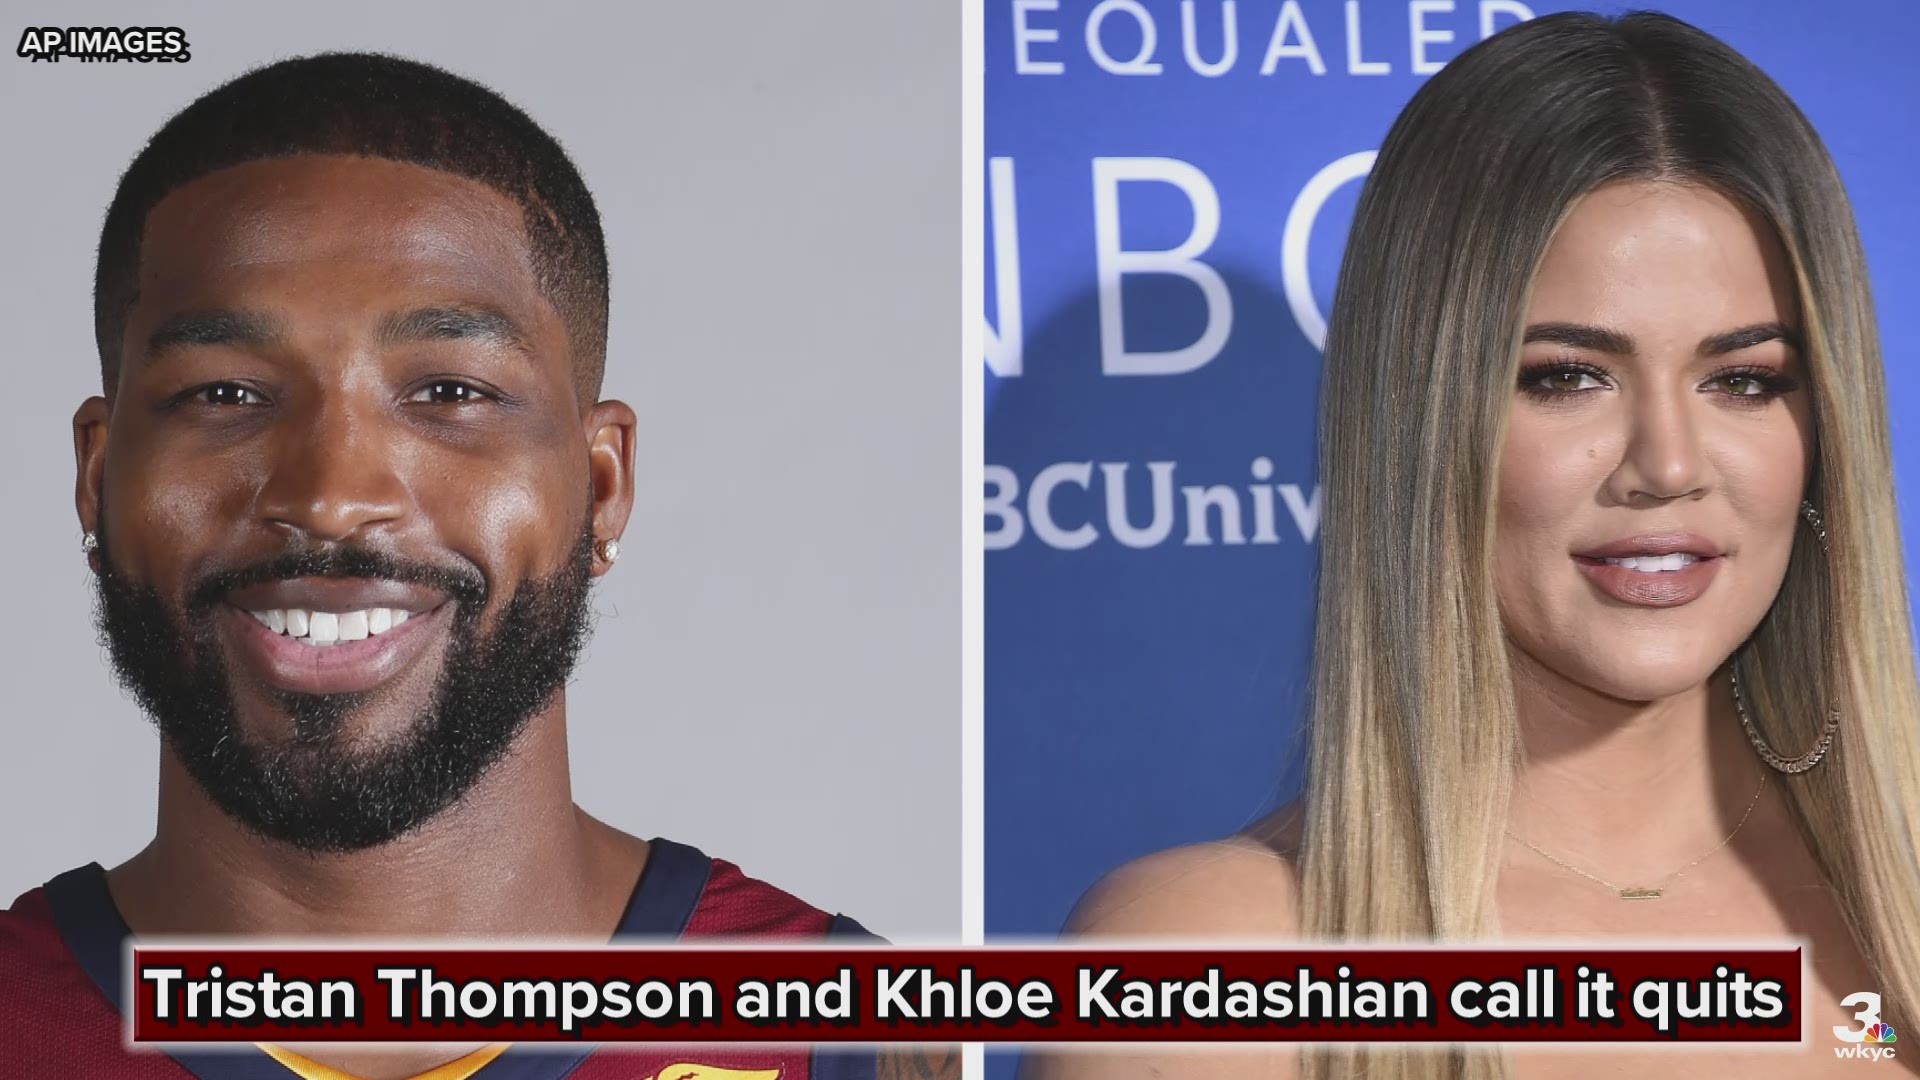 According to TMZ, Cleveland Cavaliers center Tristan Thompson and Khloe Kardashian are no longer an item.